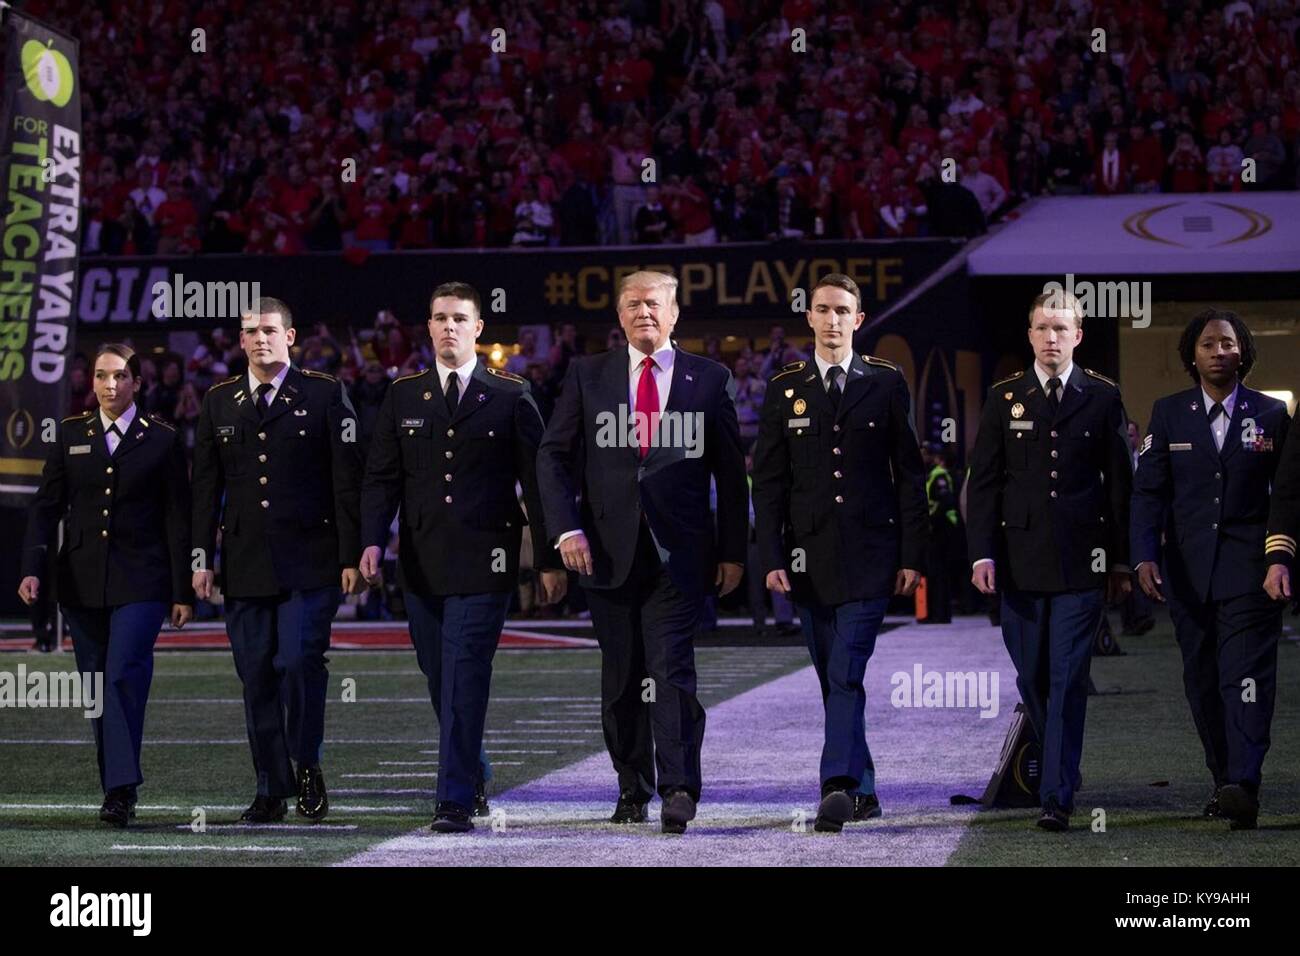 U.S. President Donald Trump walks on to the field for the NCAA College Football Playoff National Championship between the University of Alabama Crimson Tide and the University of Georgia Bulldogs January 8, 2018 in Atlanta, Georgia. Stock Photo